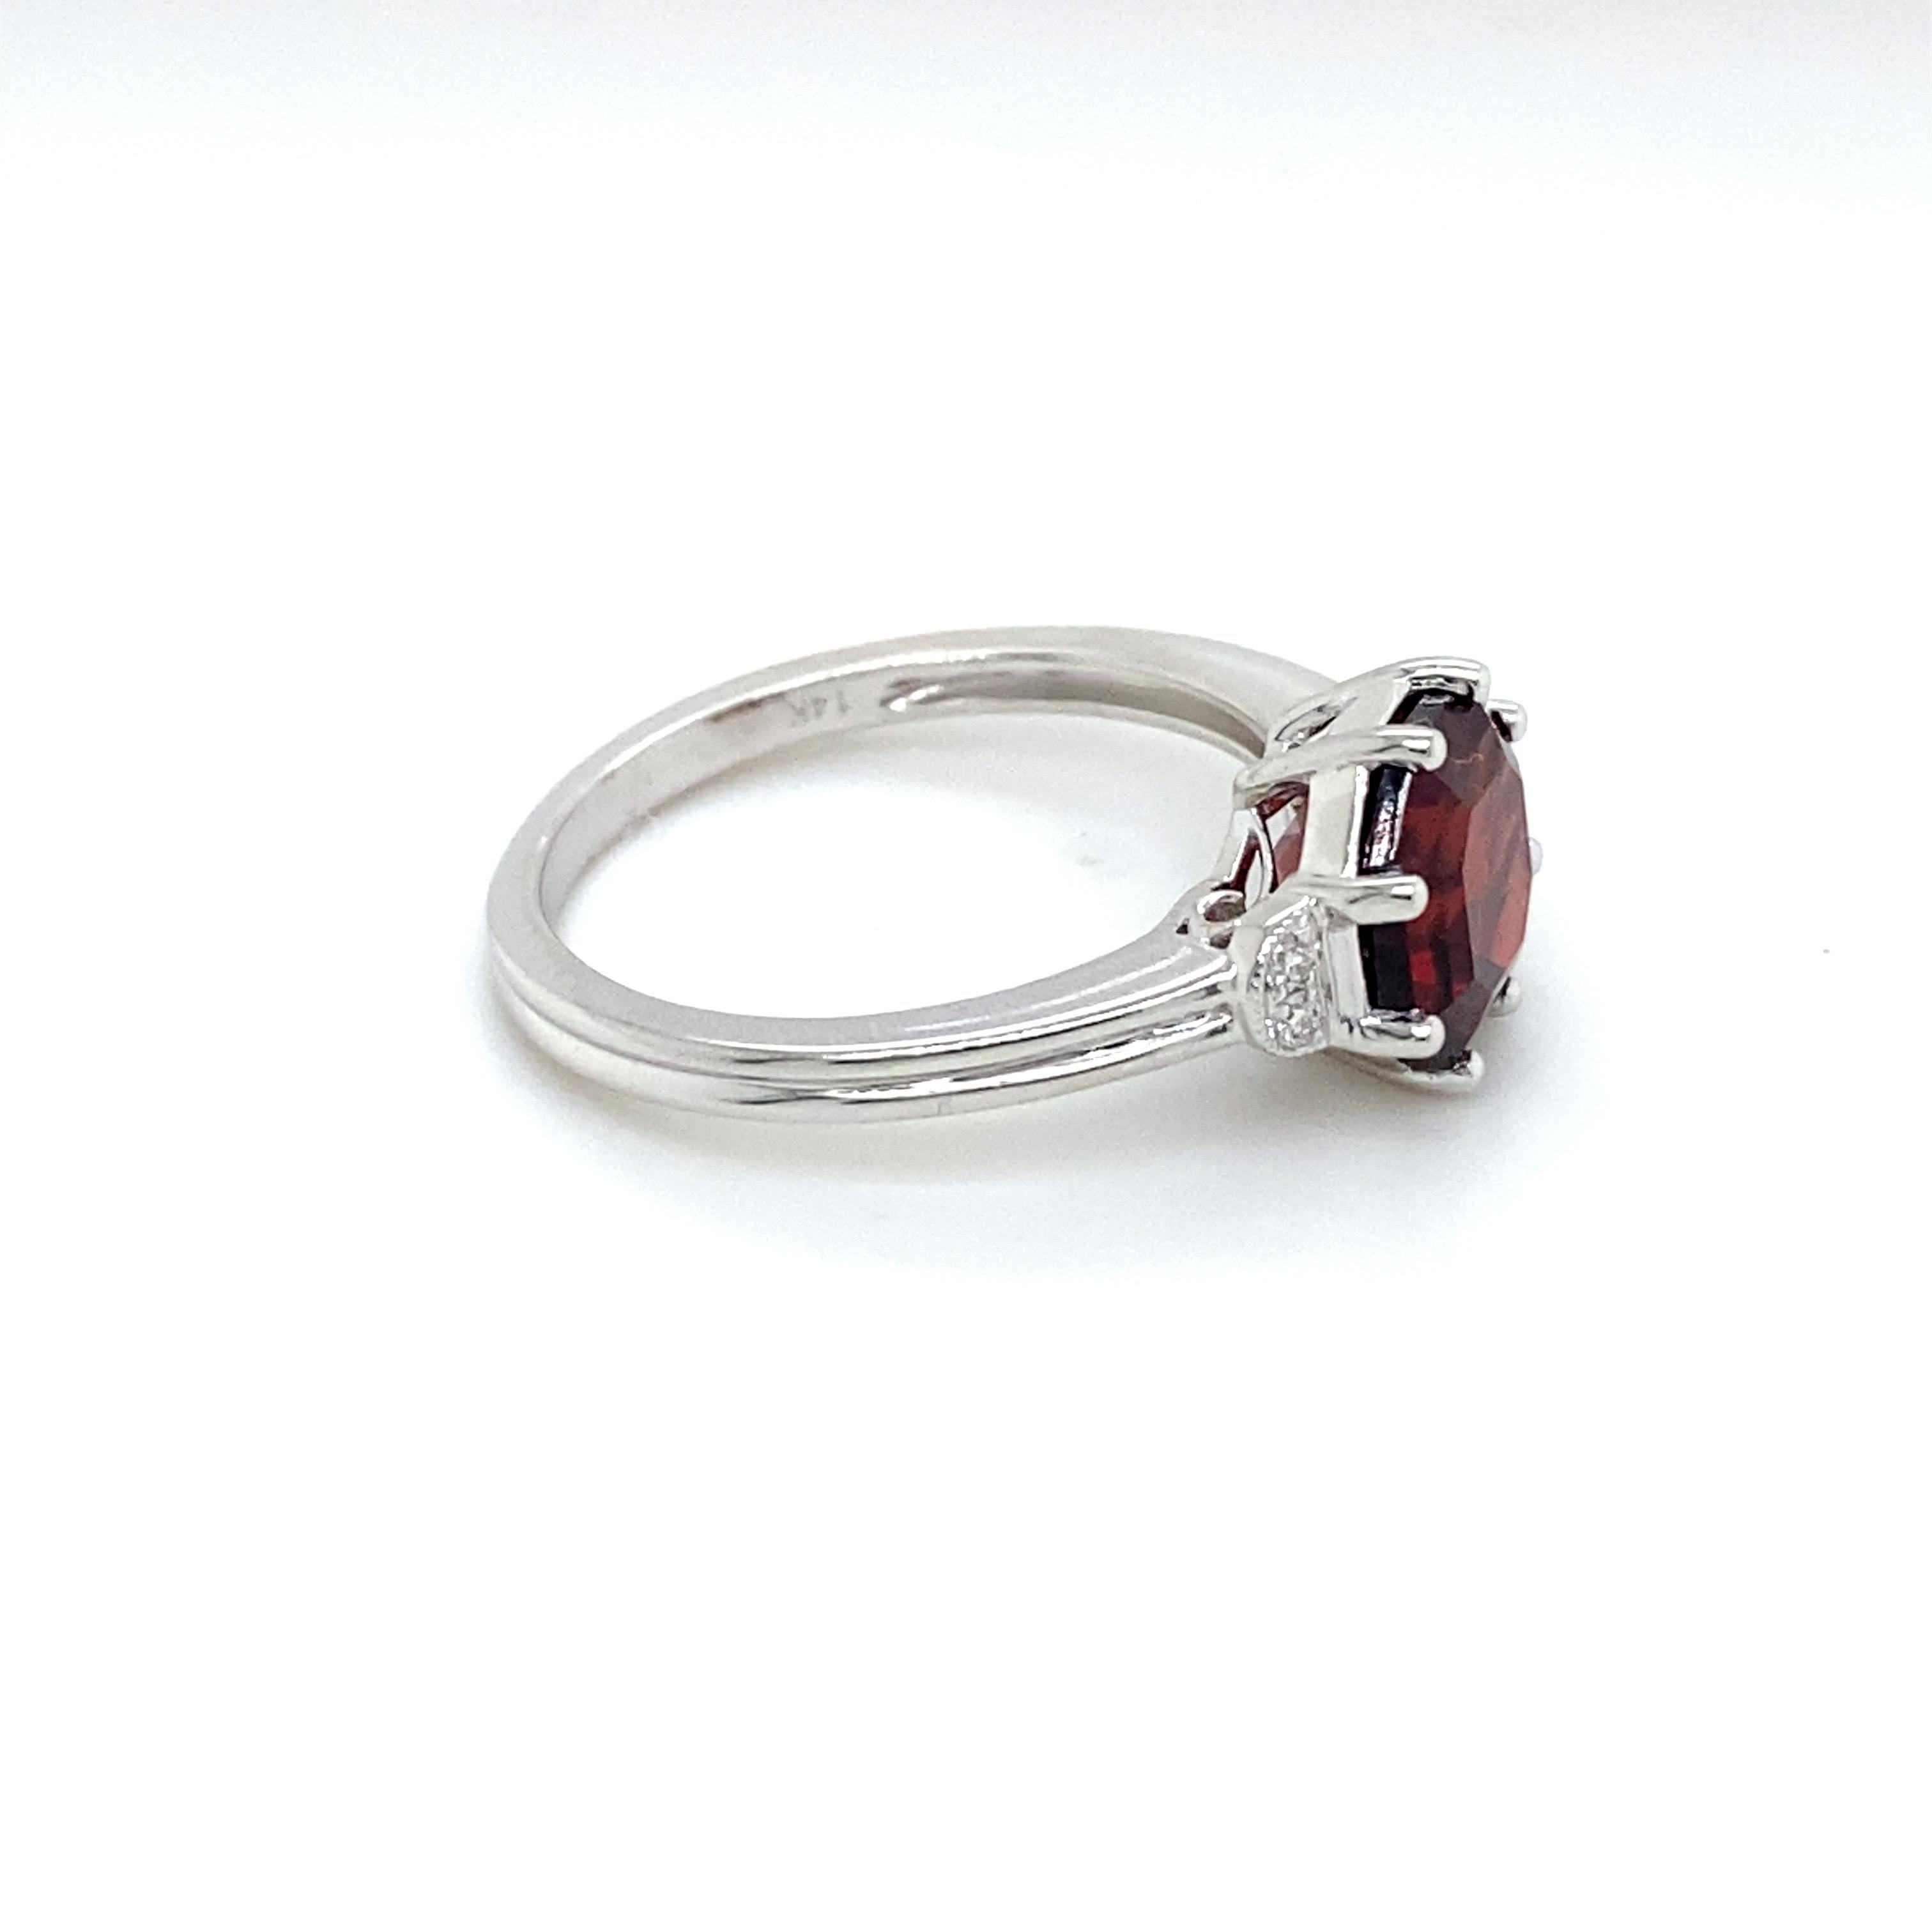 This three stone ring is a unique design! The garnet is cut in a hexagonal faceted design and is elegant with a diamond on either side. If you love the color red, you will love this ring. The ring is constructed out of solid 14 karat white gold